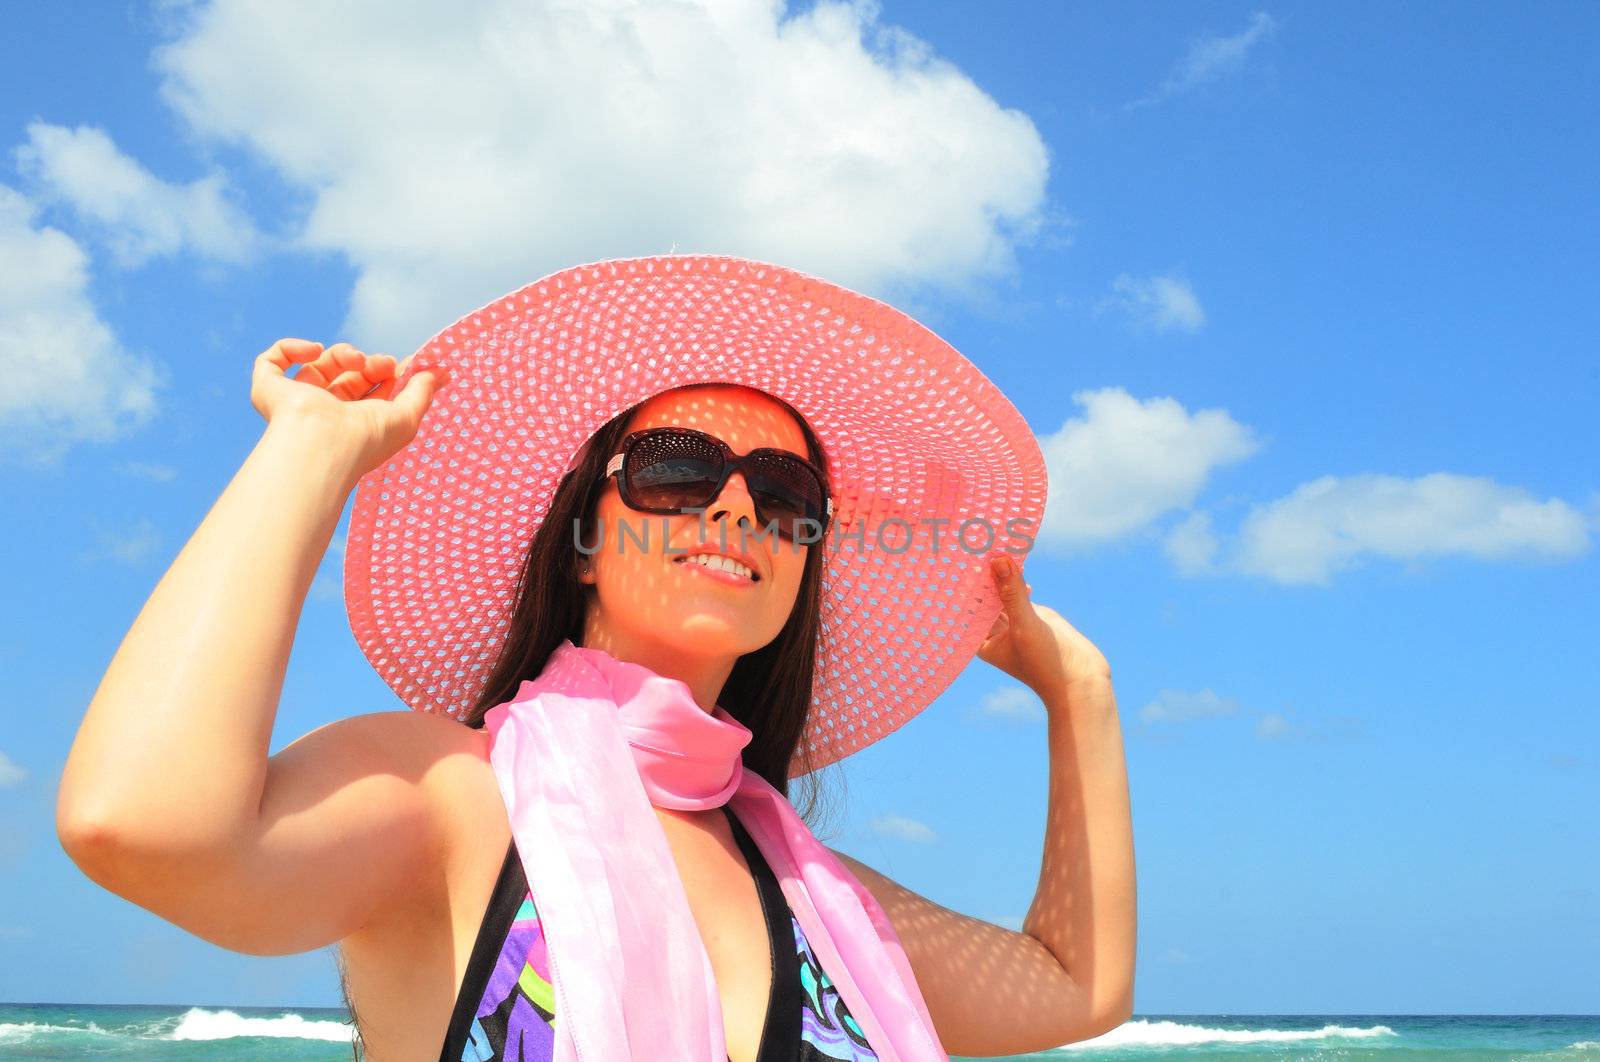 The young woman lifted her head to the sun and keeps the pink hat with both hands